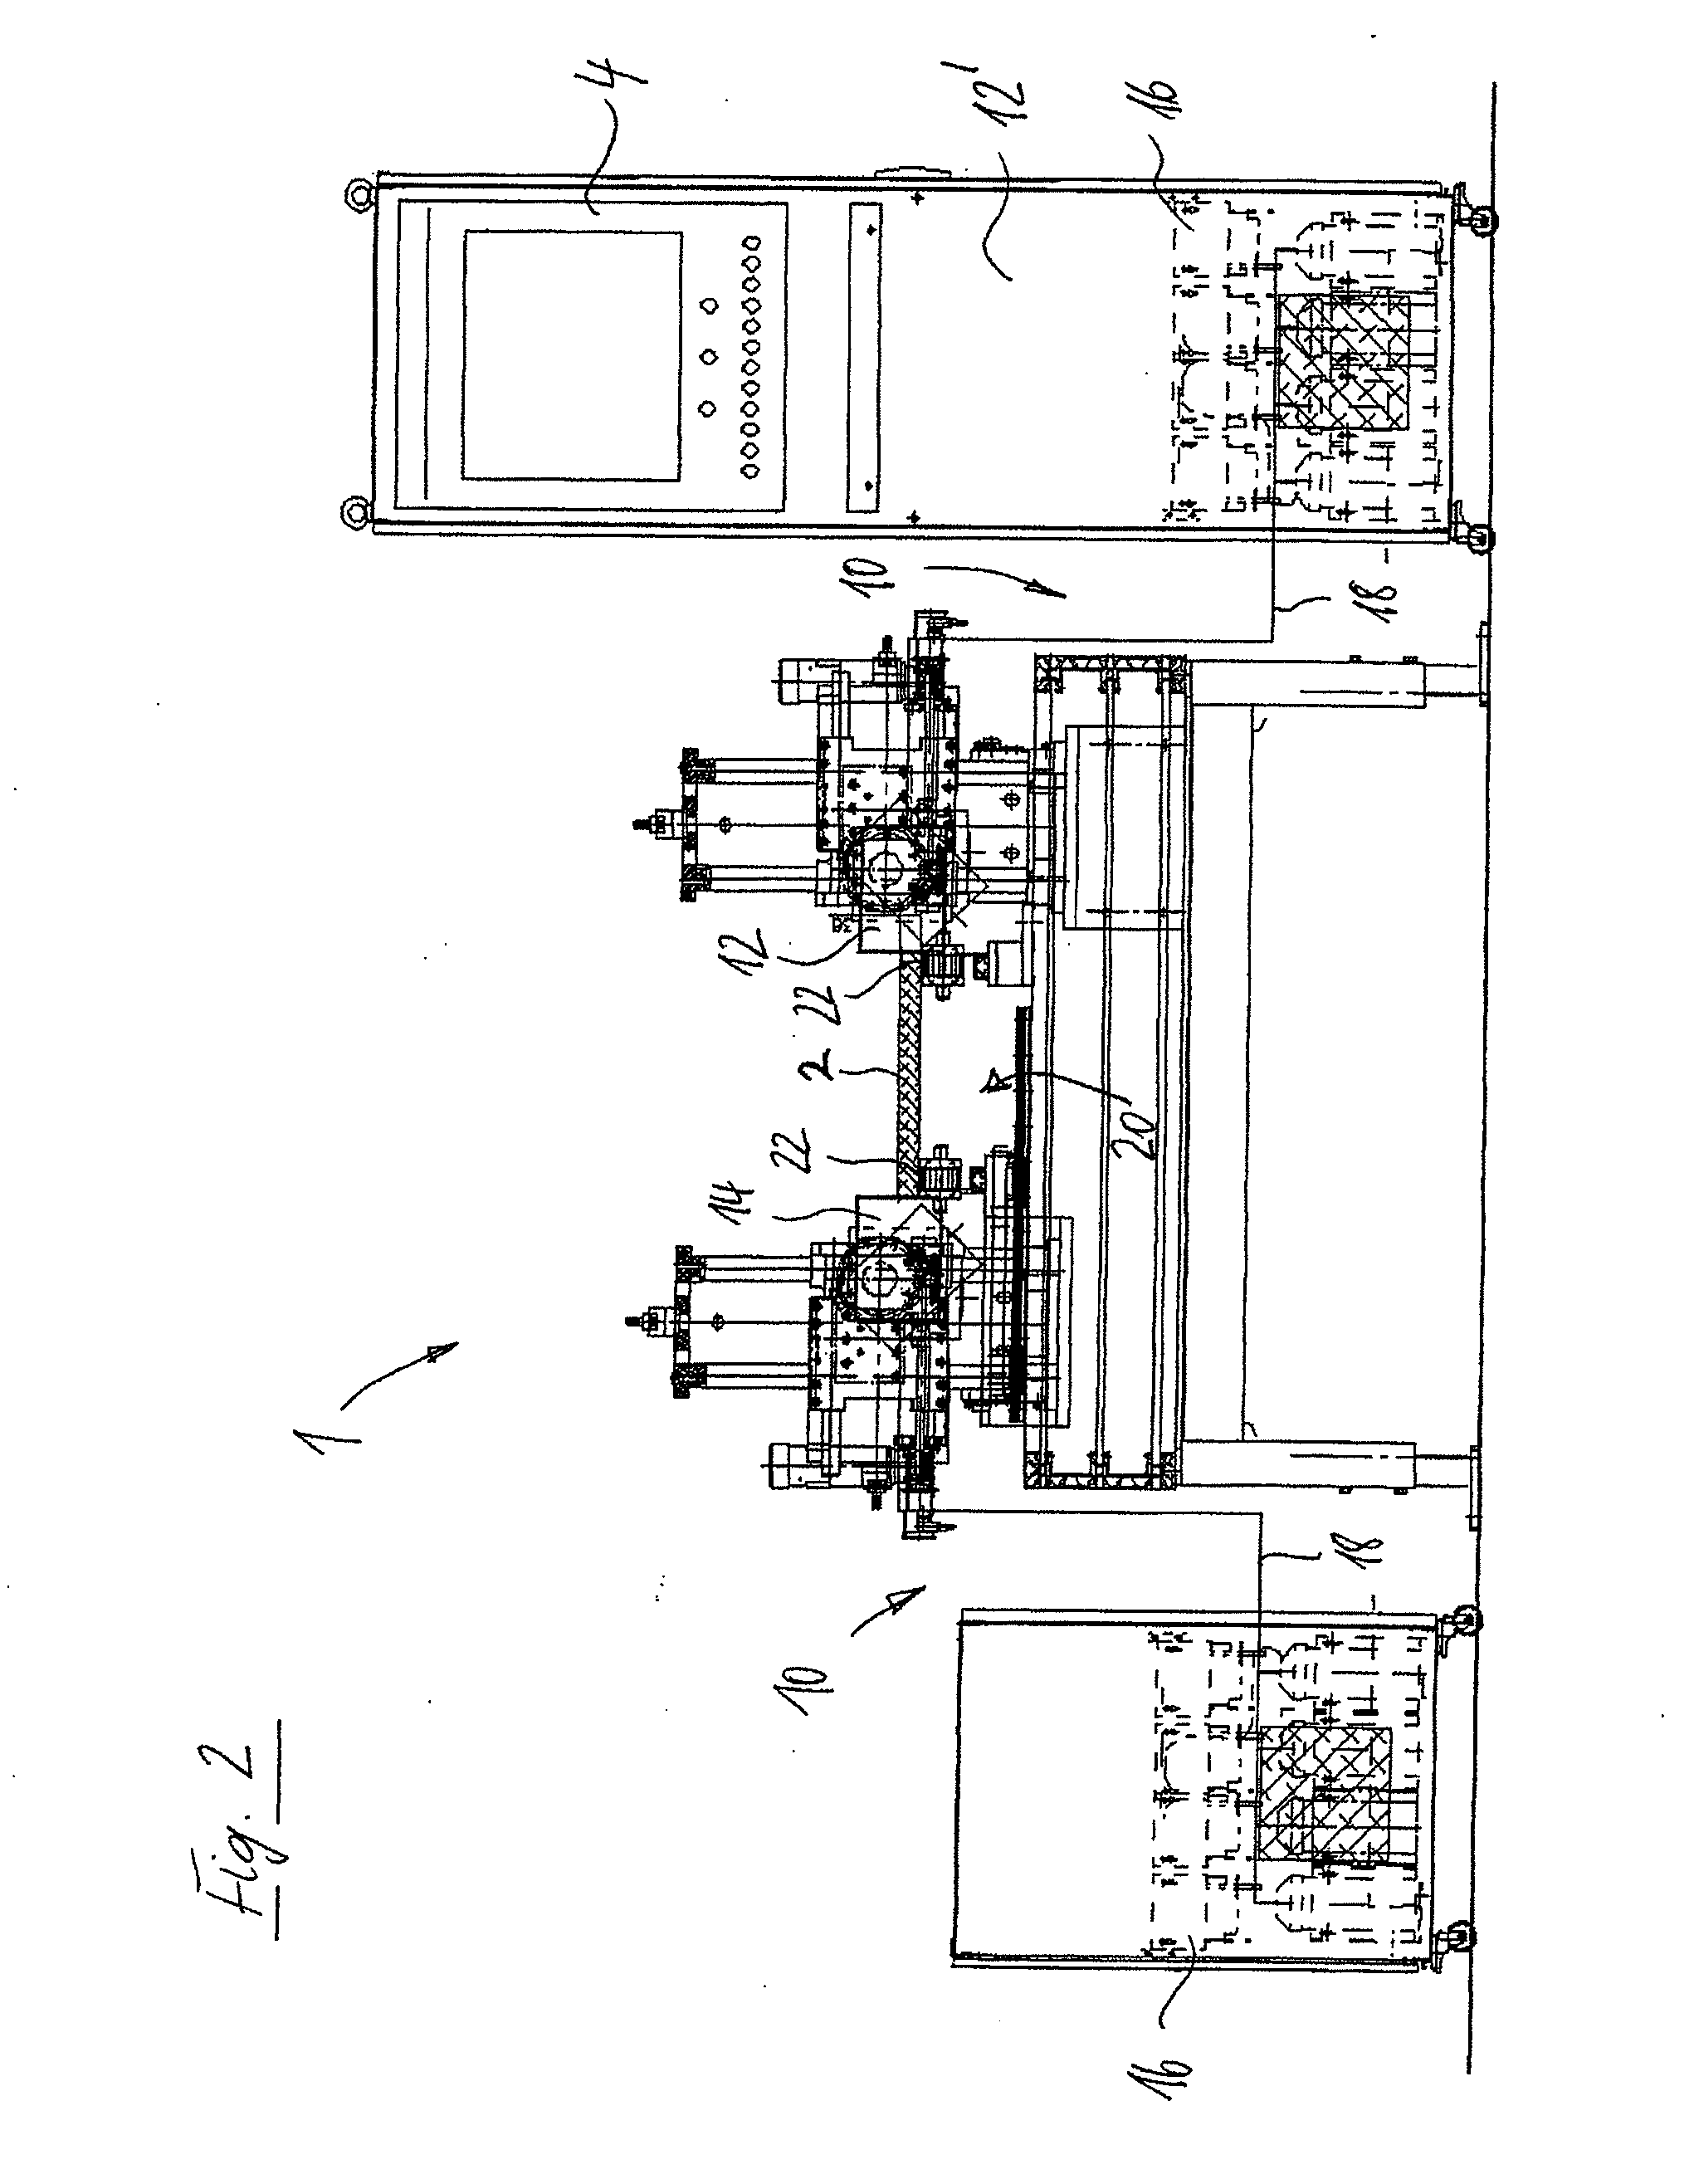 Device and Method for Imprinting a Three-Dimensional Article